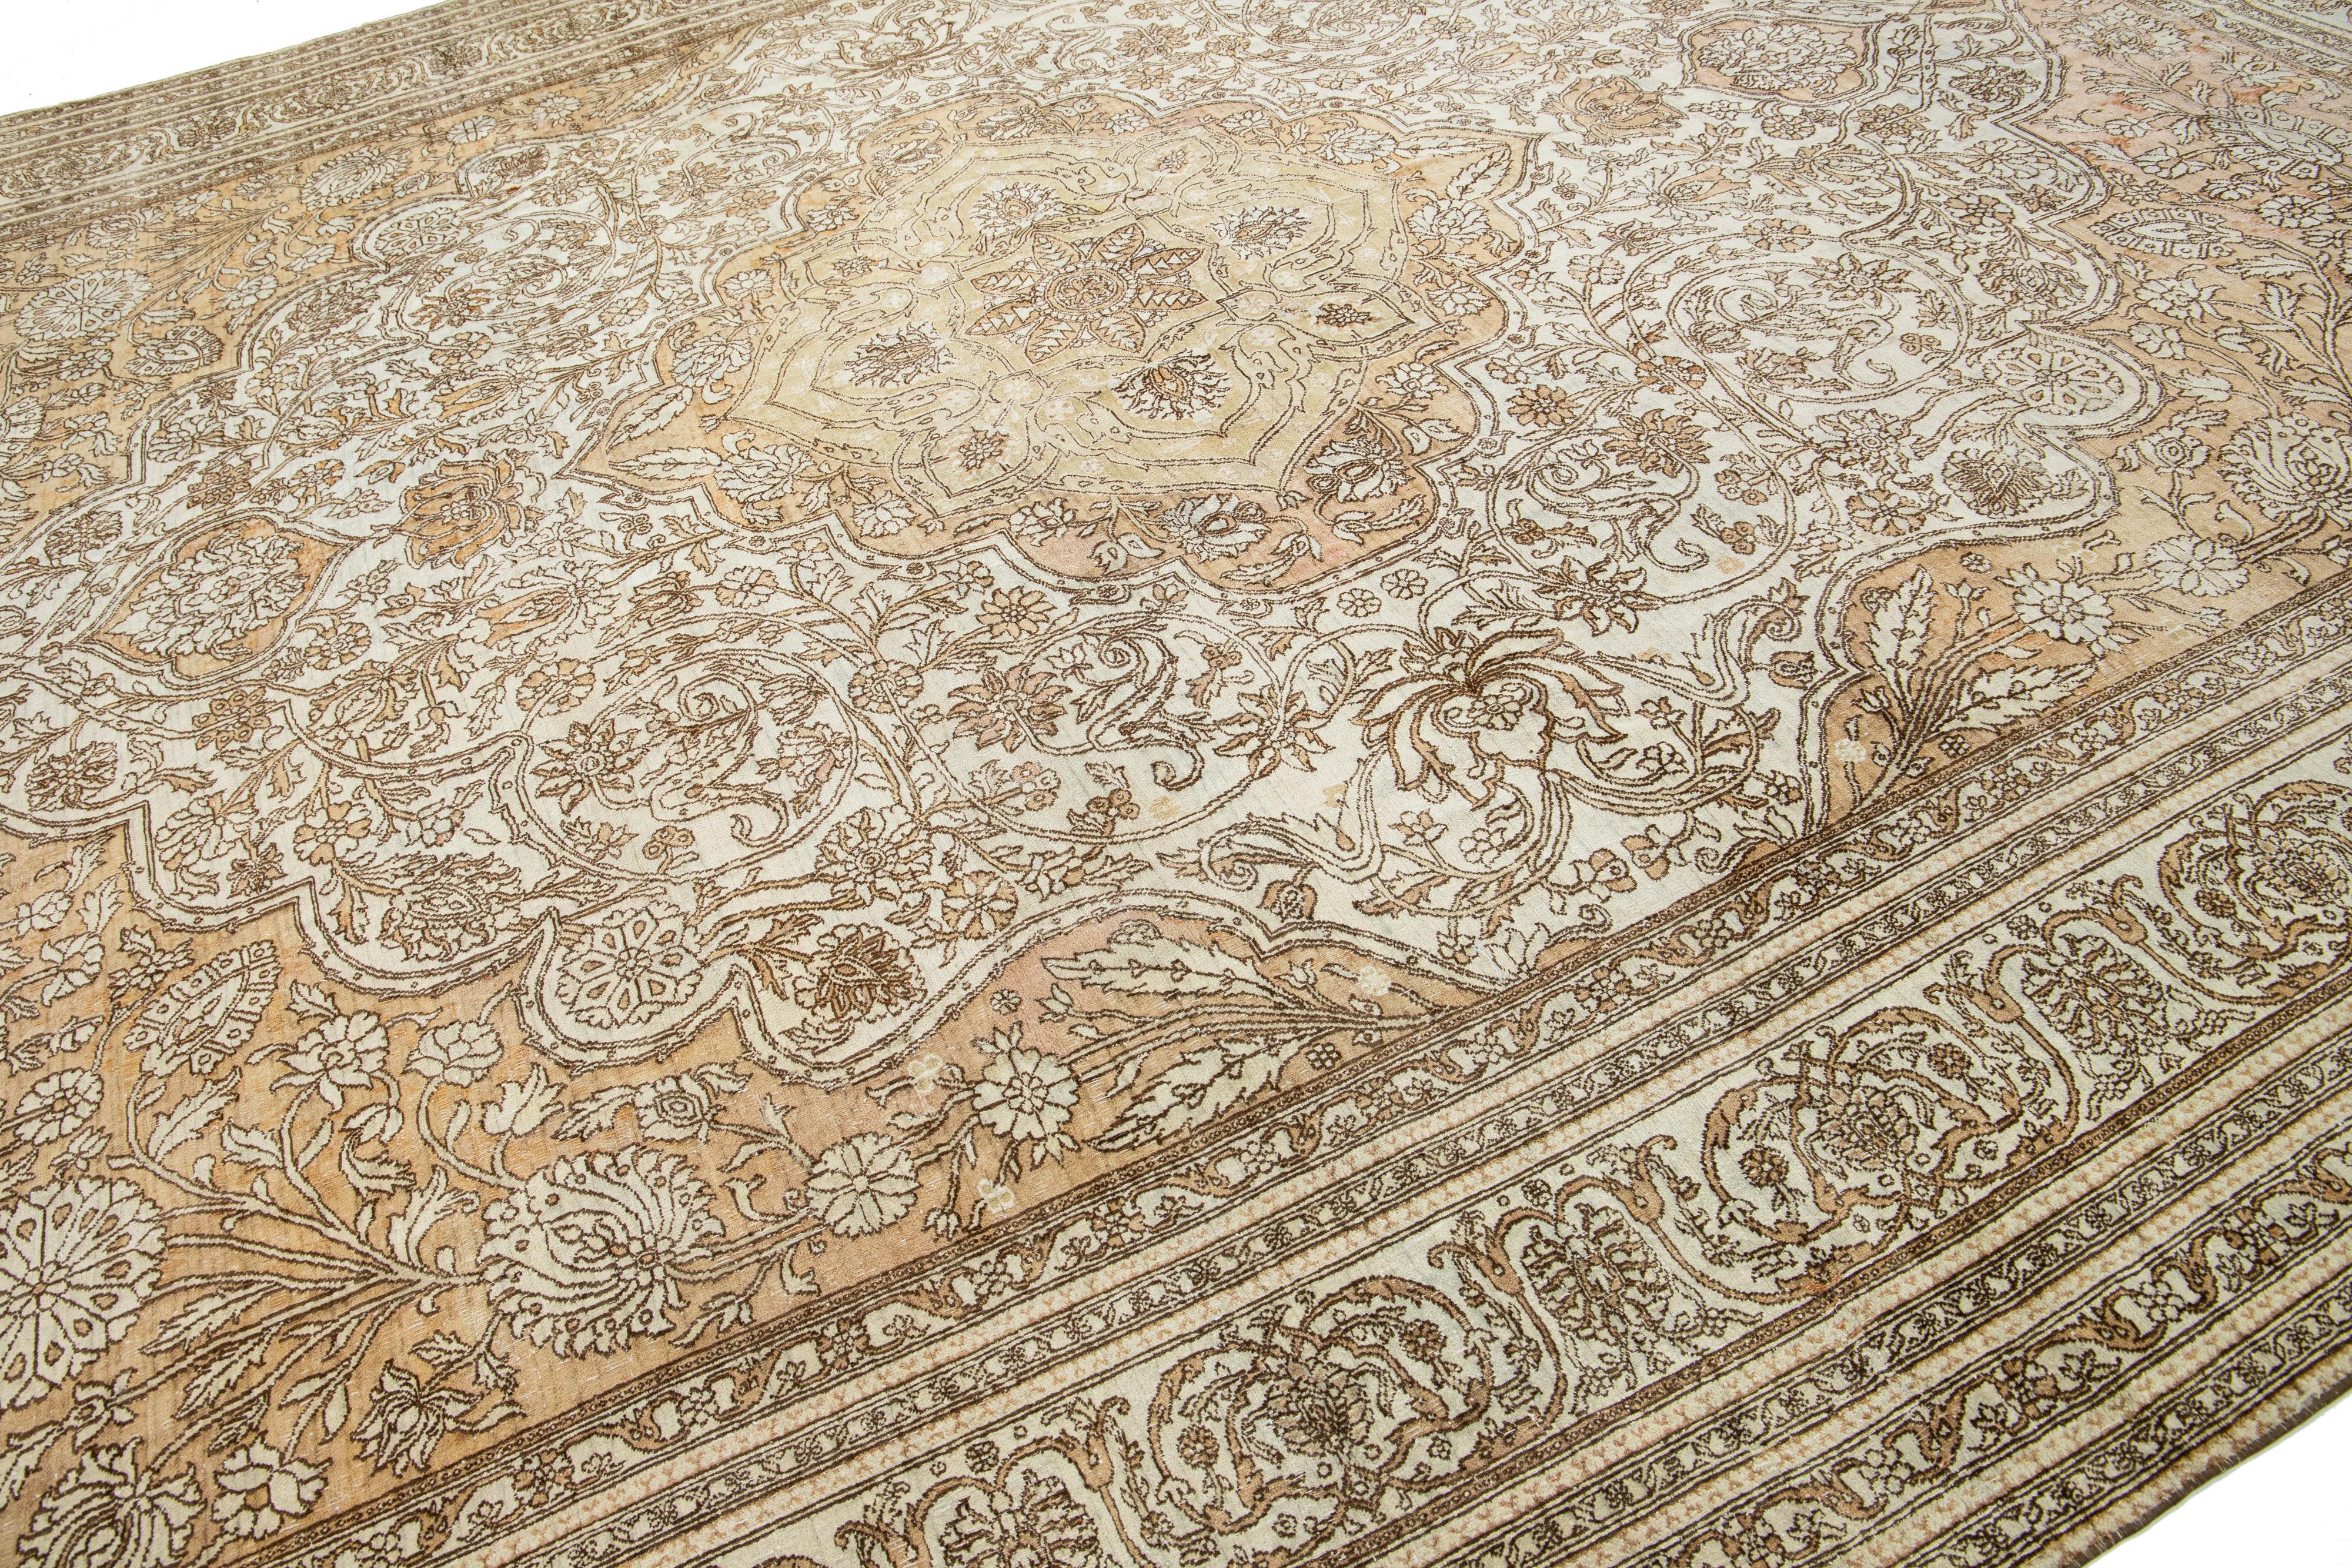 Hand-Knotted 1900 Antique Indian Agra Wool Rug in Ivory and Tan with Medallion Design For Sale